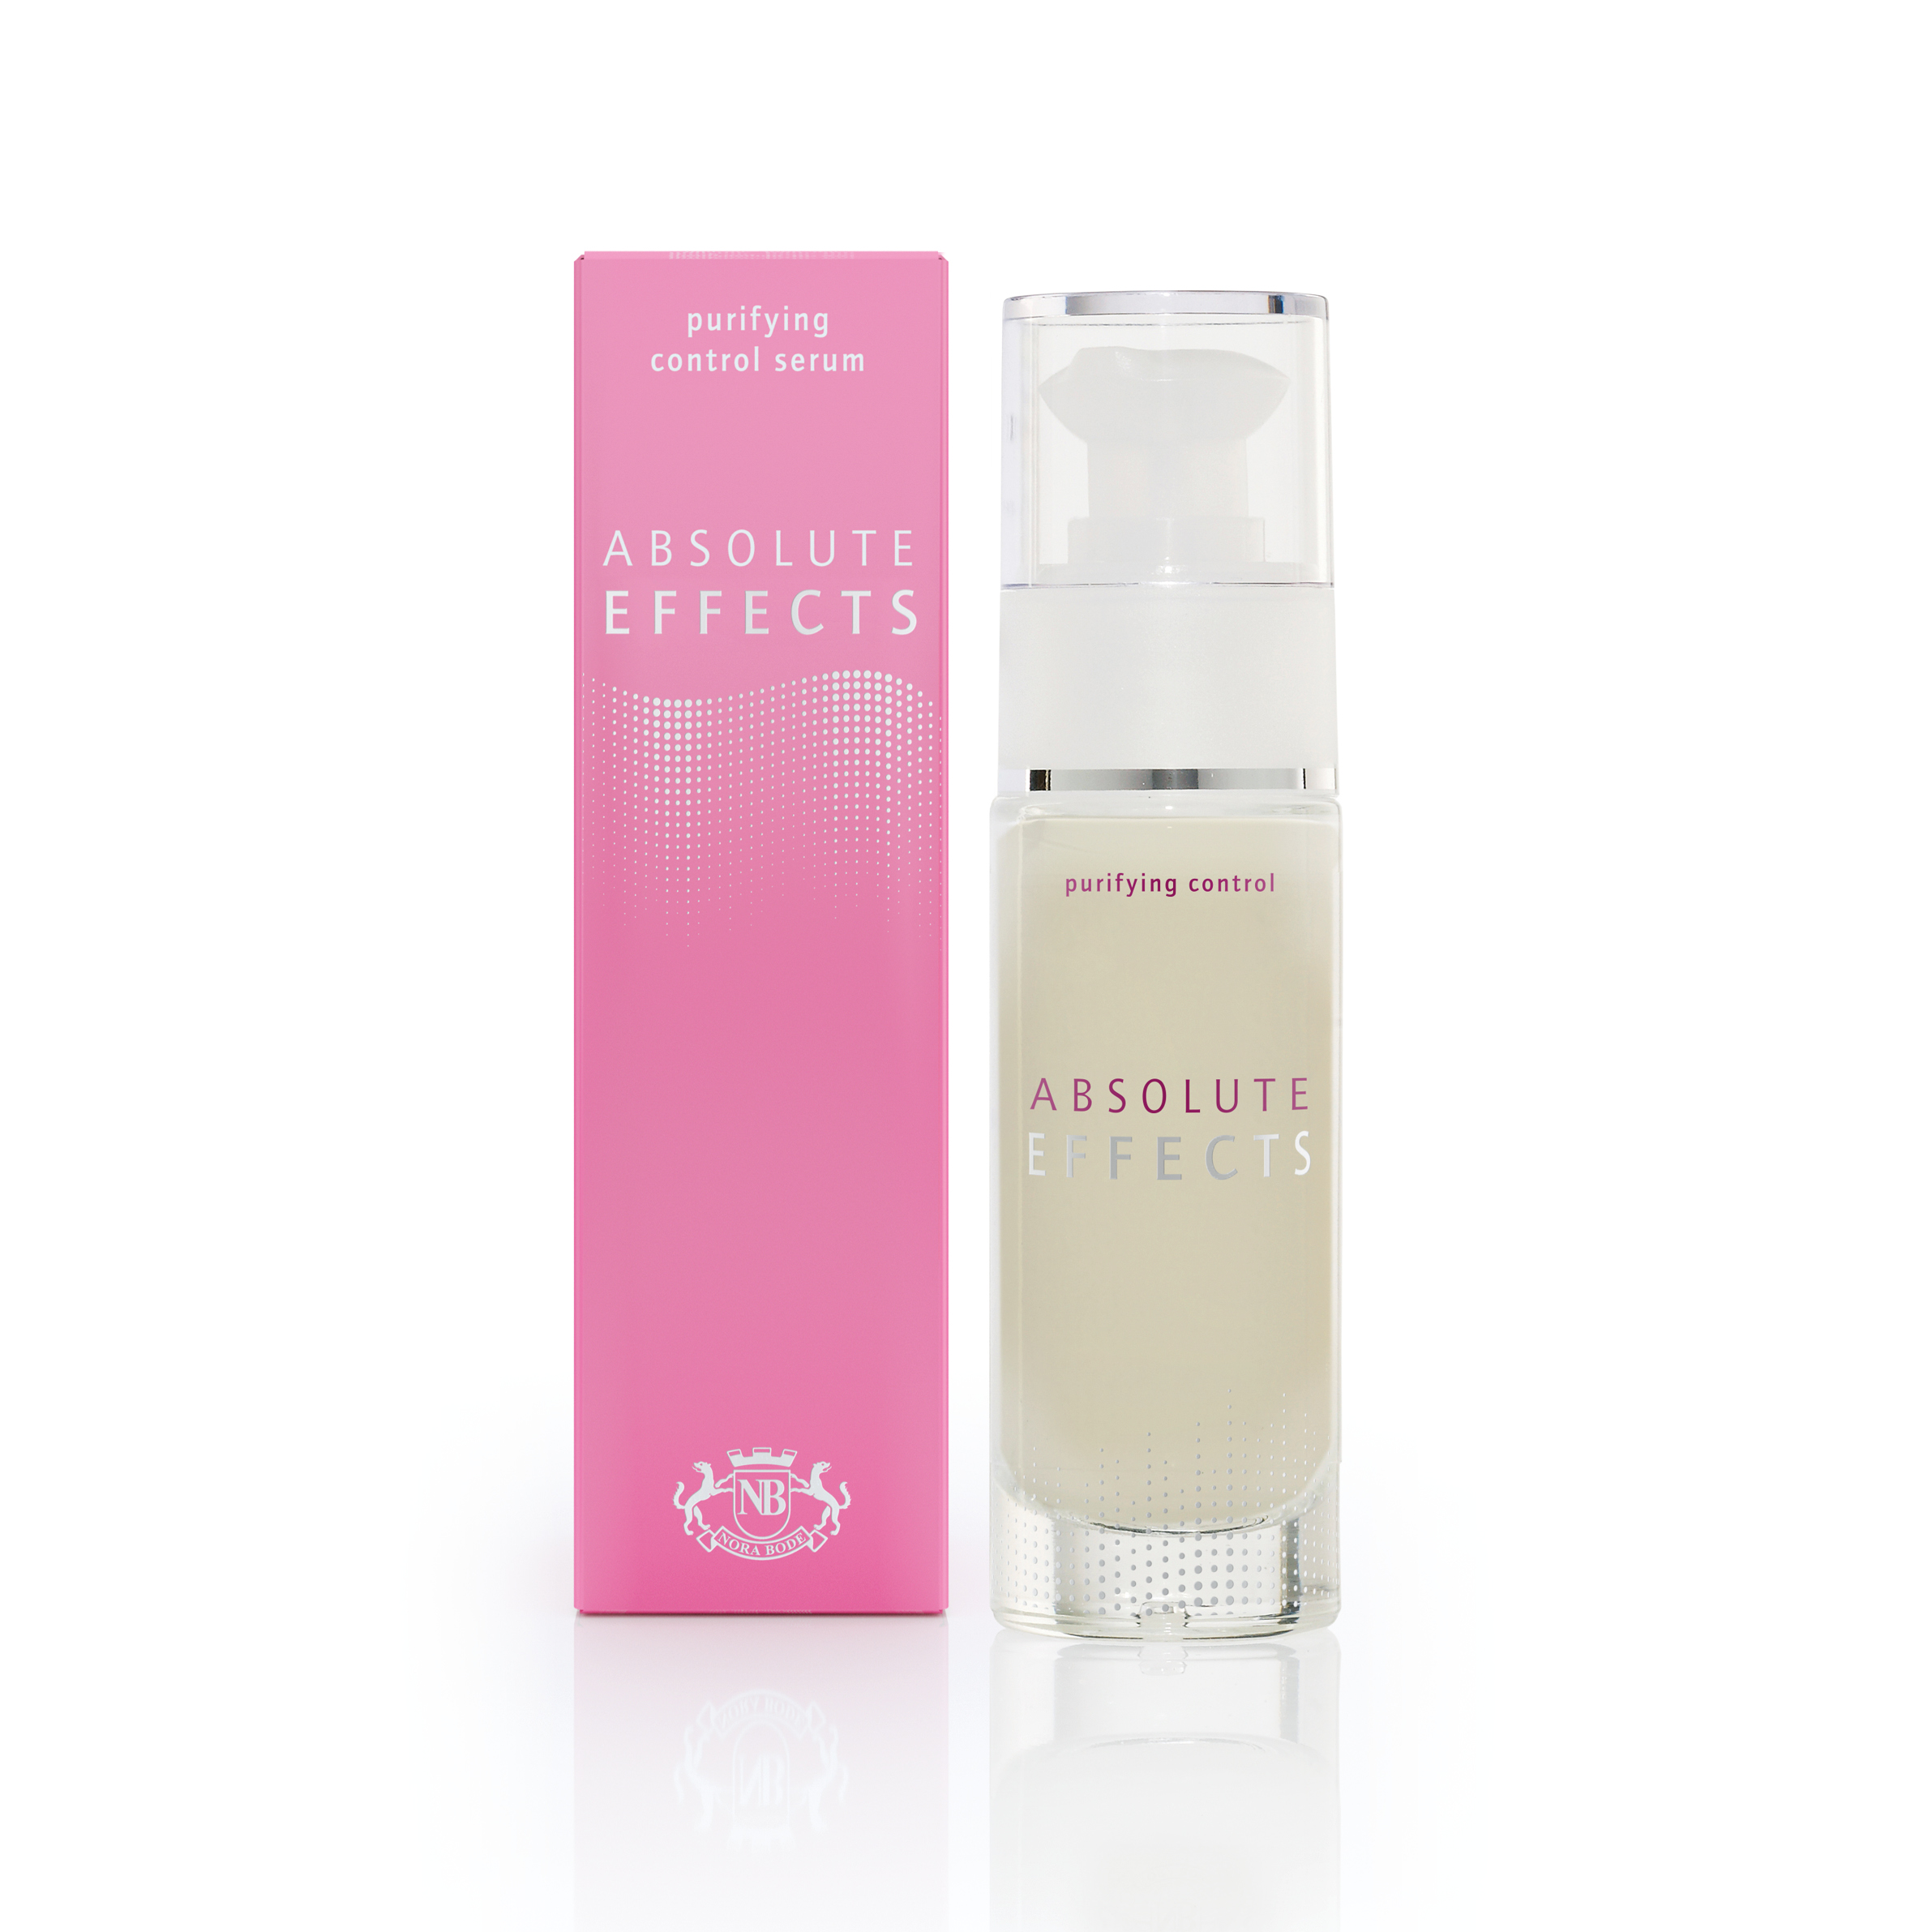 ABSOLUTE EFFECTS purifying control serum